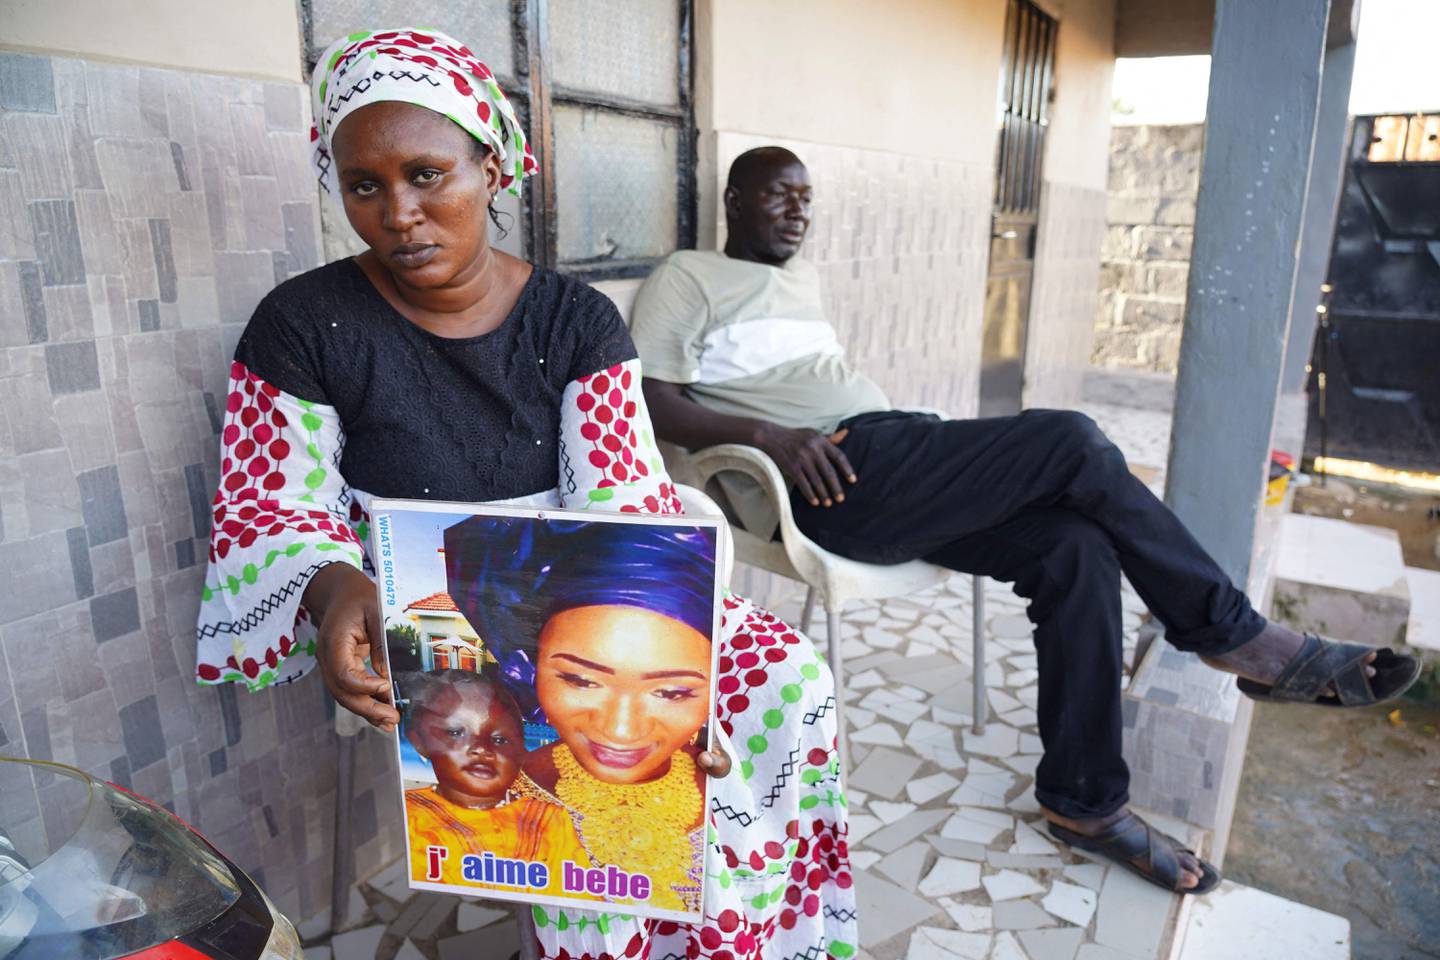 Mariama Kuyateh, holds up a picture of her late son, Musawho, died from acute kidney failure, in Banjul, Gambia. AFP